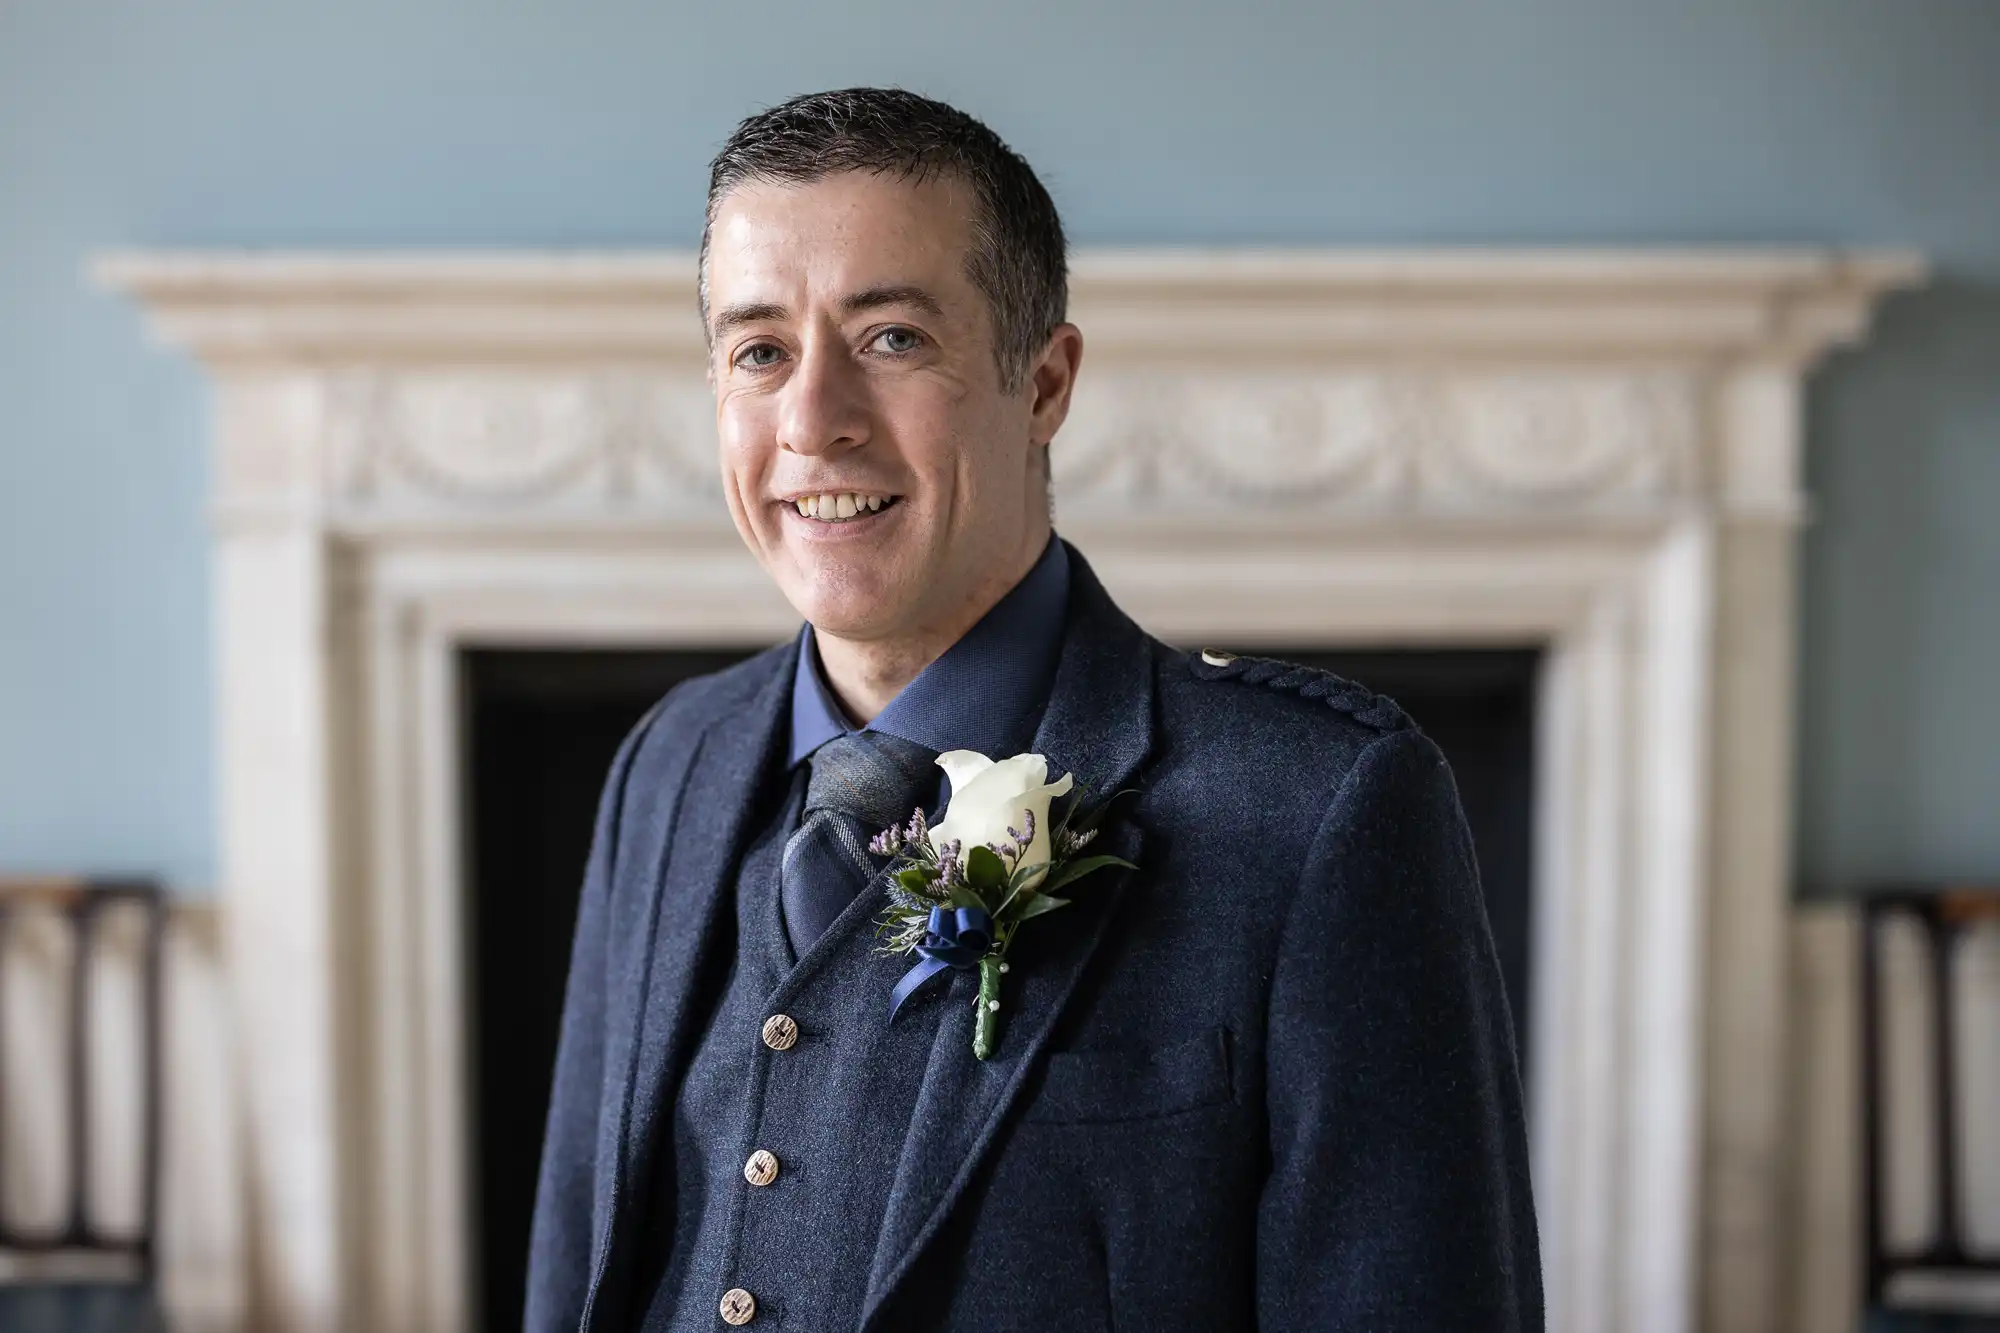 A man in a blue suit with a flower boutonniere stands in front of an ornate fireplace, smiling at the camera.